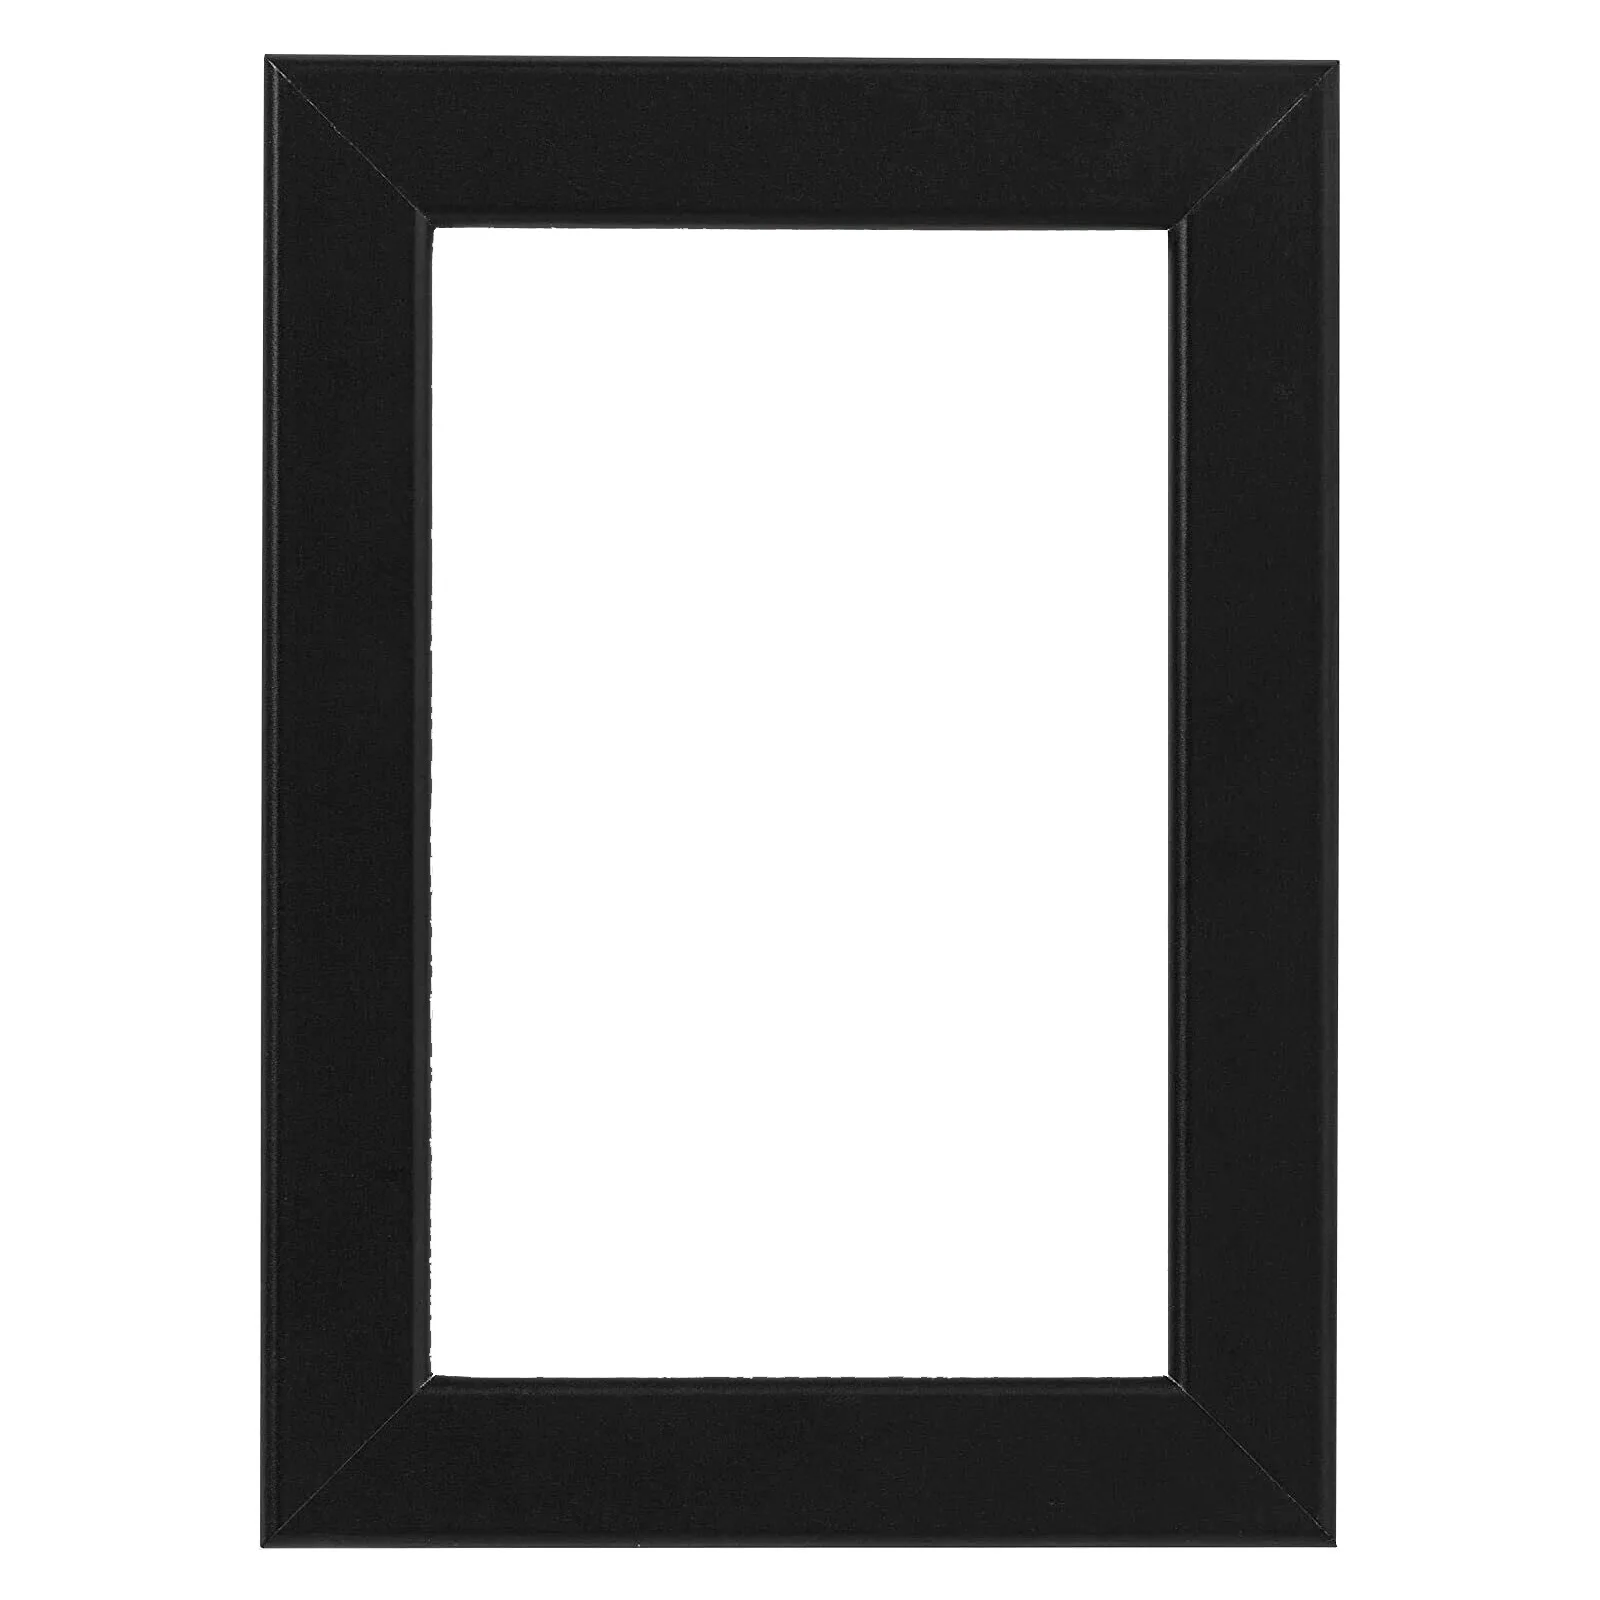 HappyHapi 4x6 Picture Frame,Set of 8 Black Picture Frames, Tabletop or Wall  Display Decoration Photo Frame for Photos, Paintings, Landscapes, Posters